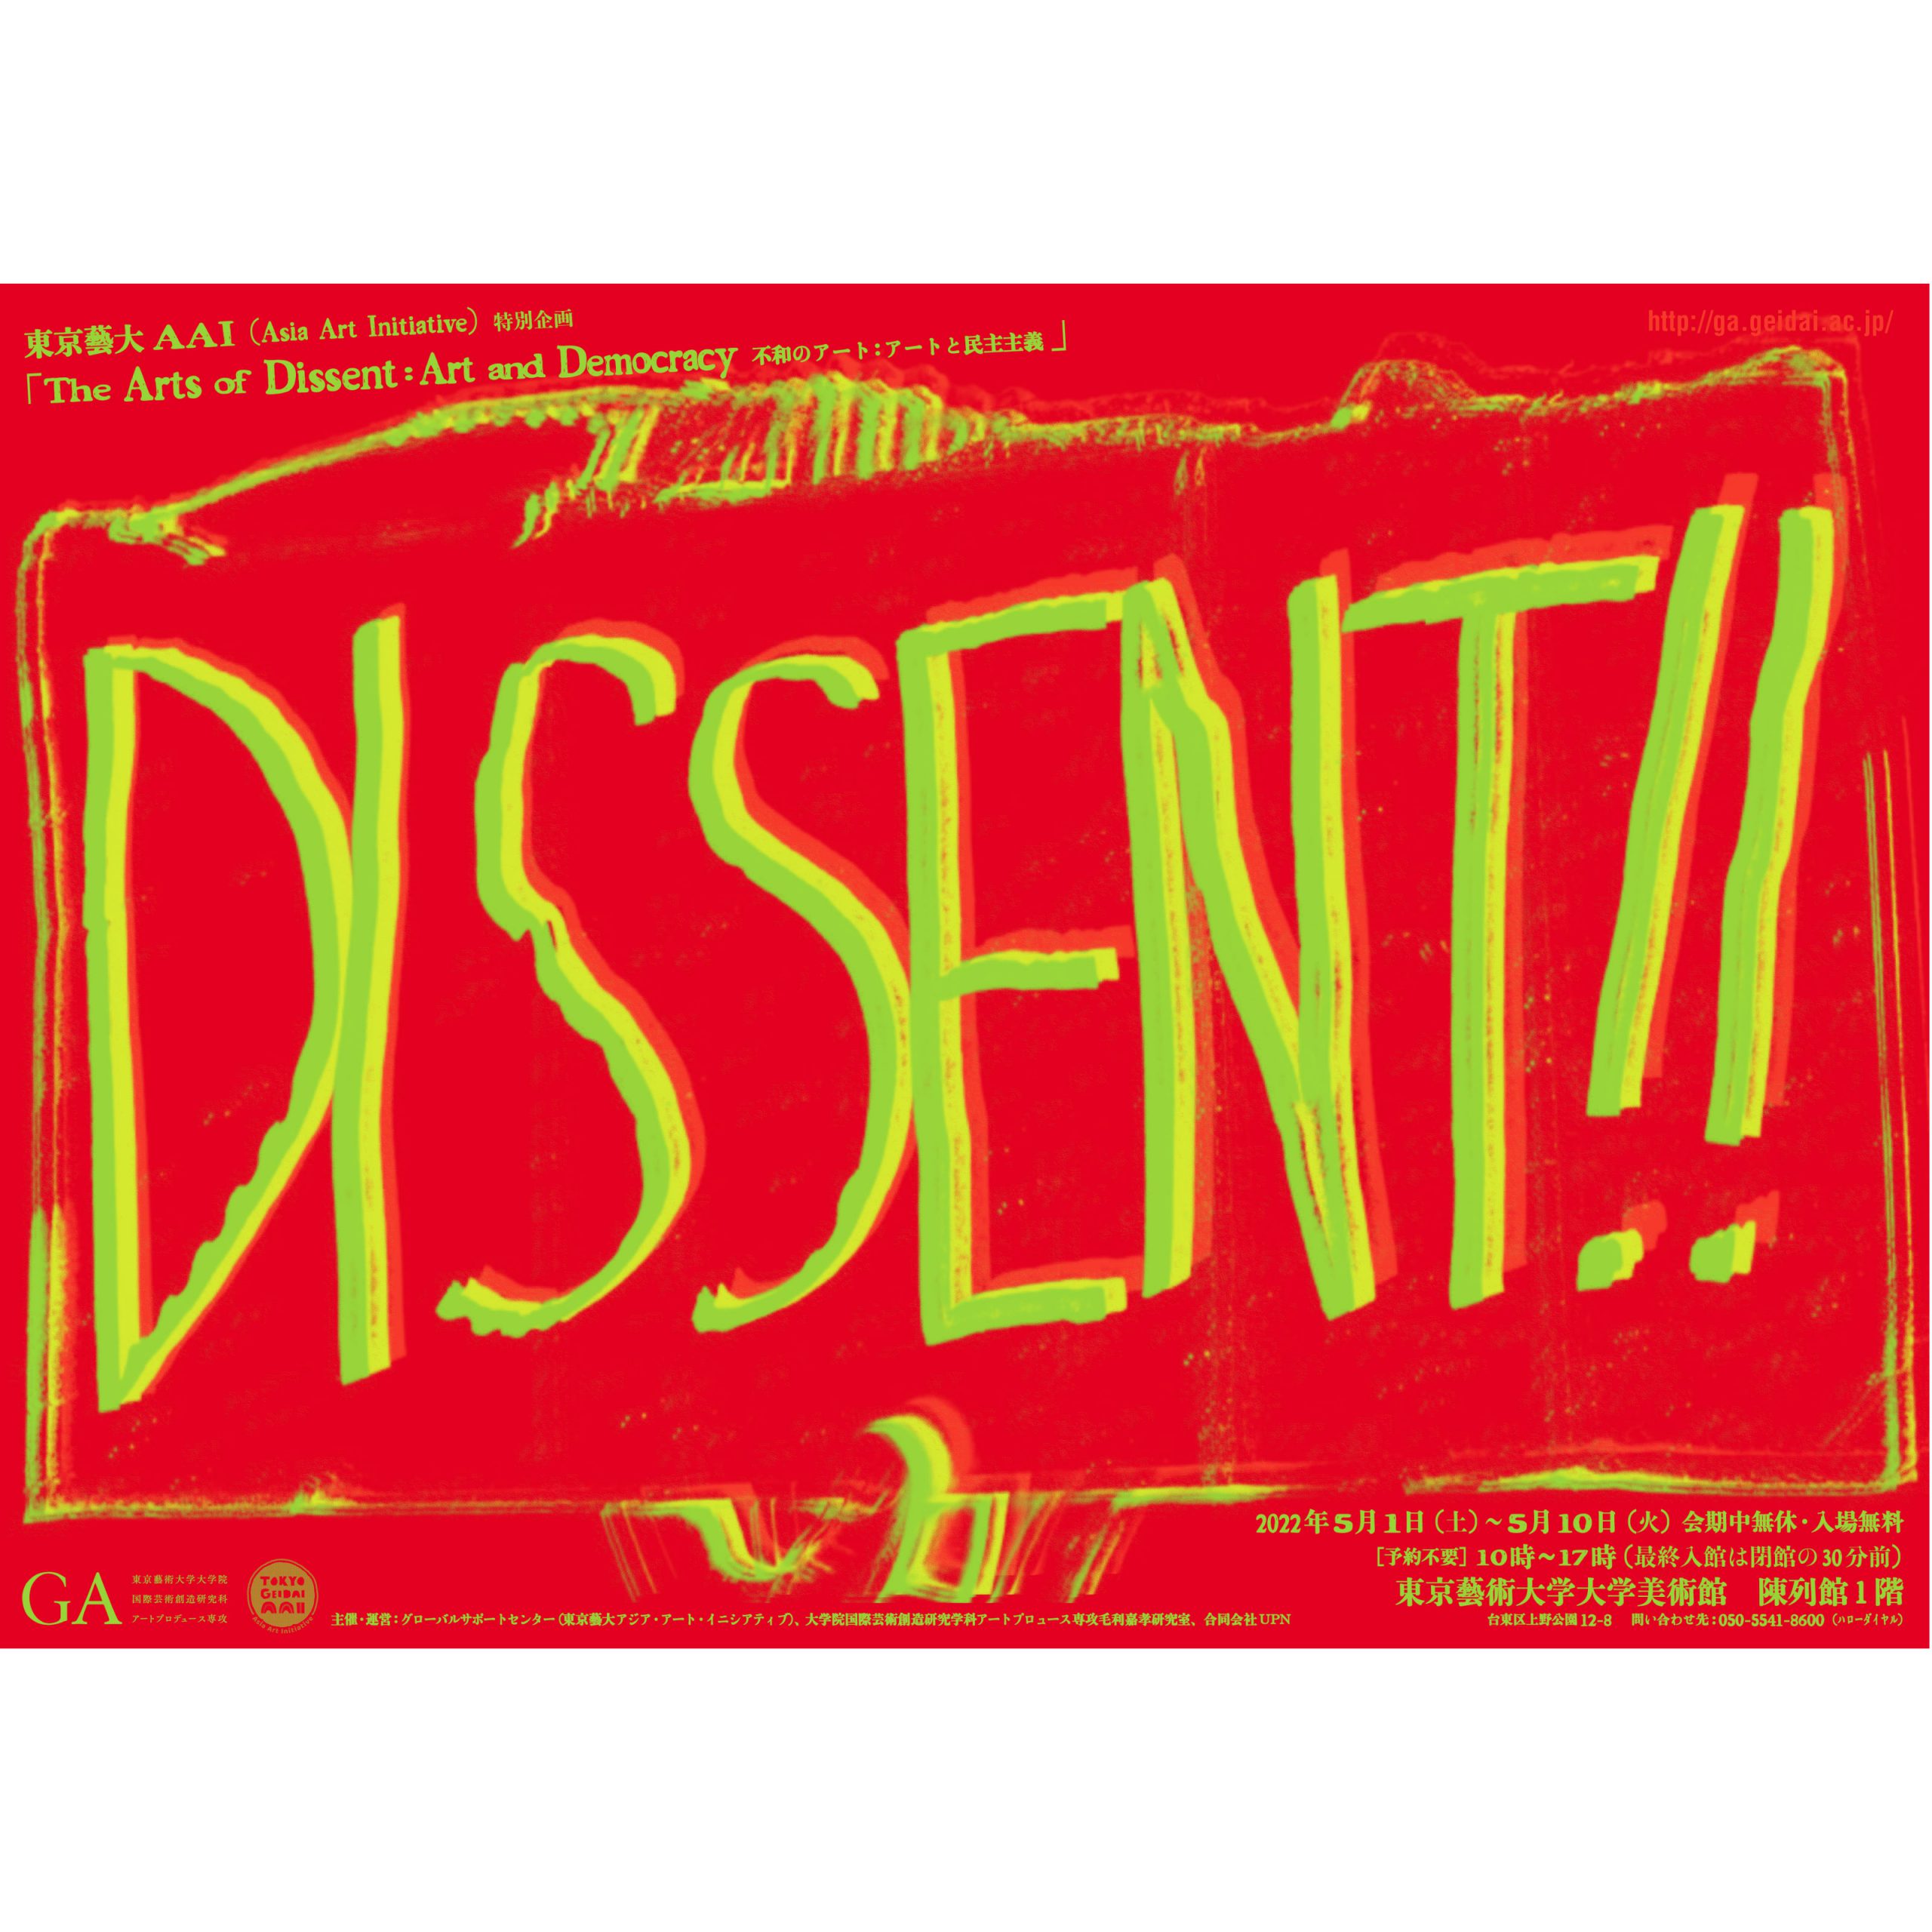 ExhibitionThe Arts Of Dissent: Art And Democracy